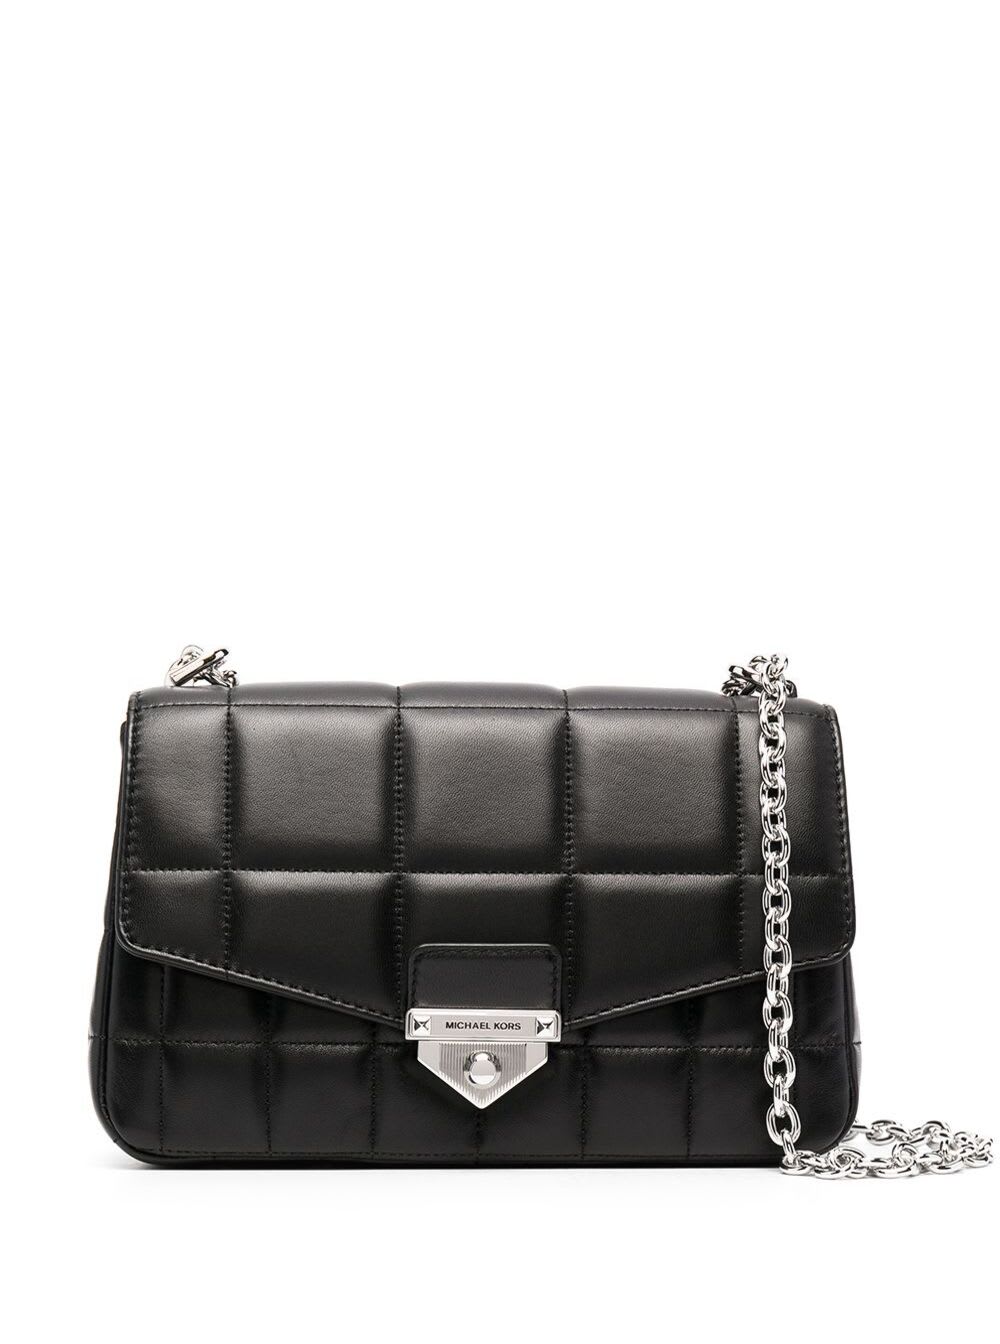 Michael Michael Kors Soho Black Quilted Leather Shoulder Bag With Silver Details Woman